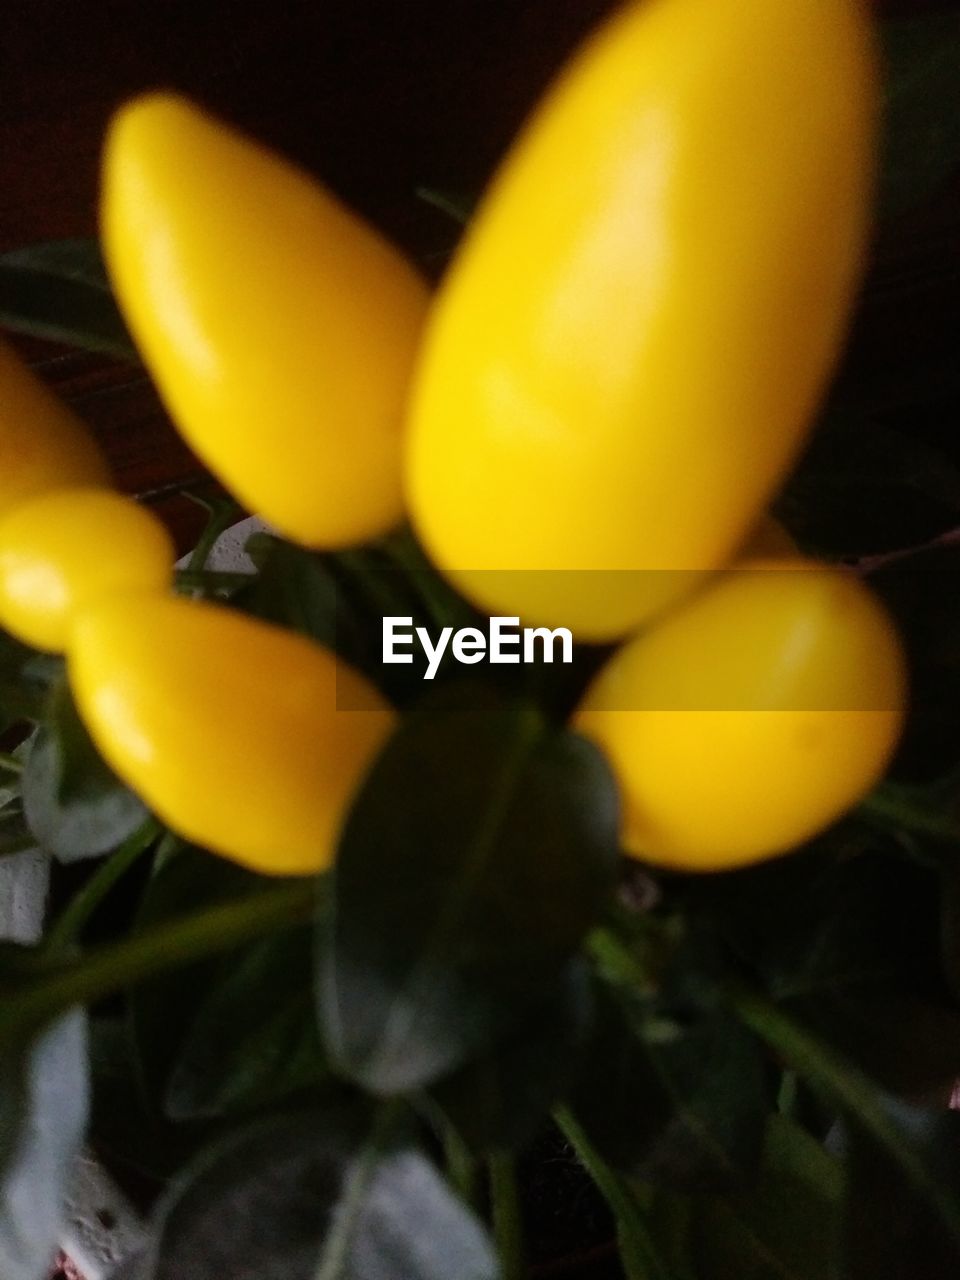 CLOSE-UP OF YELLOW FRUIT ON PLANT